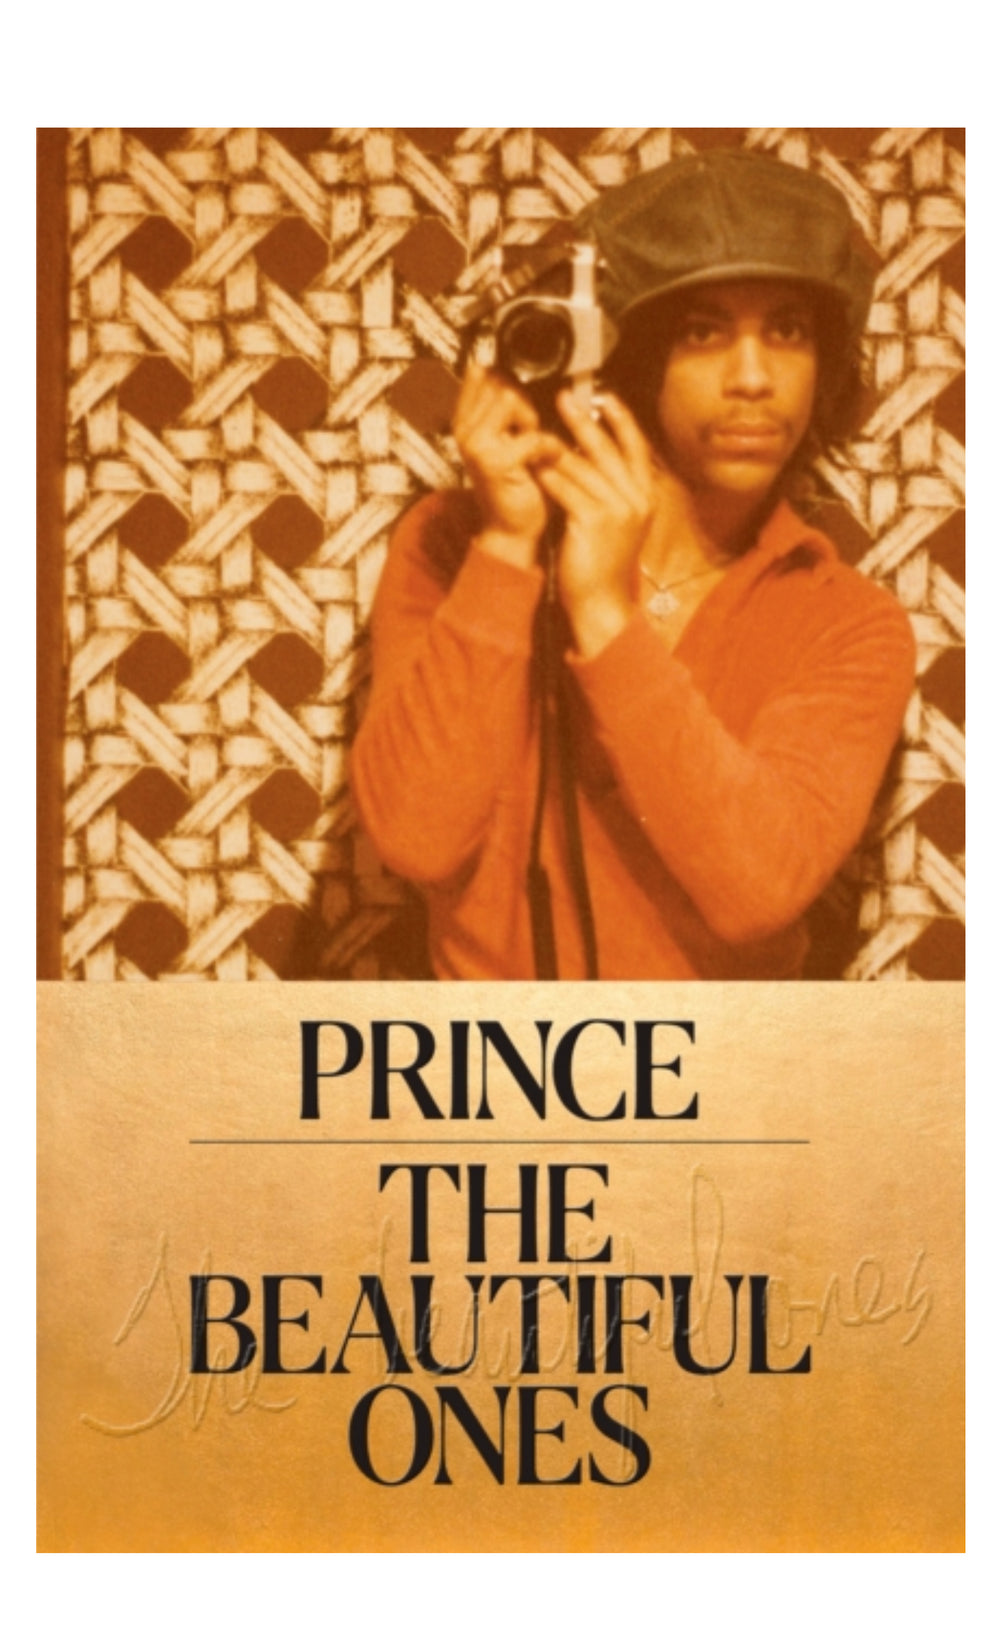 Prince – The Beautiful Ones Hardback Book 288 Pages NEW: 2019